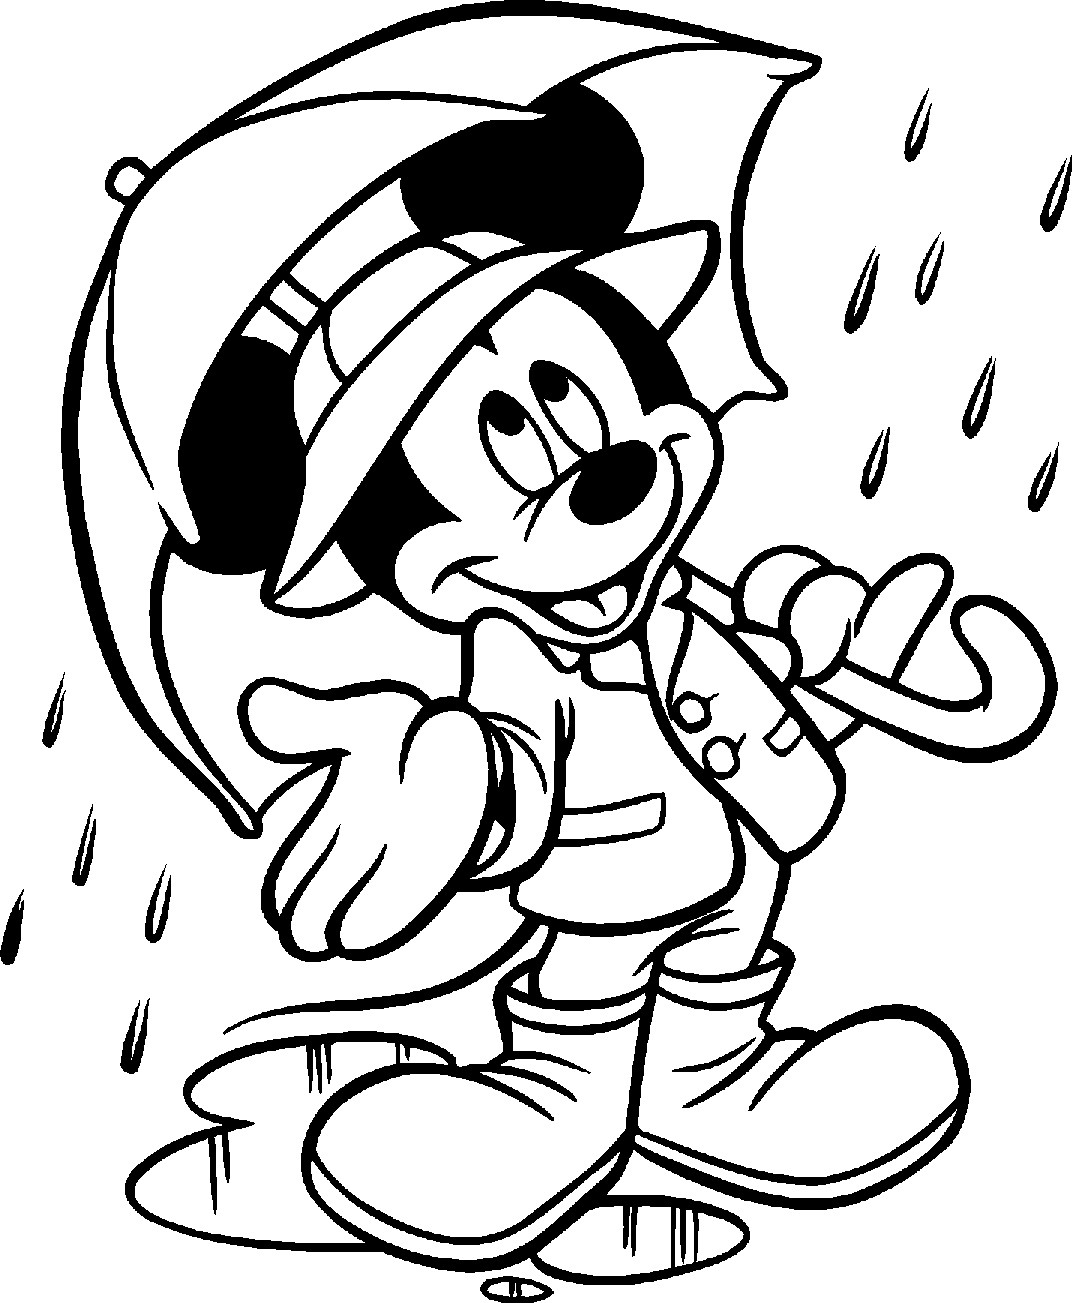 Cartoon Coloring Pages For Kids
 Cartoon Coloring Pages 17